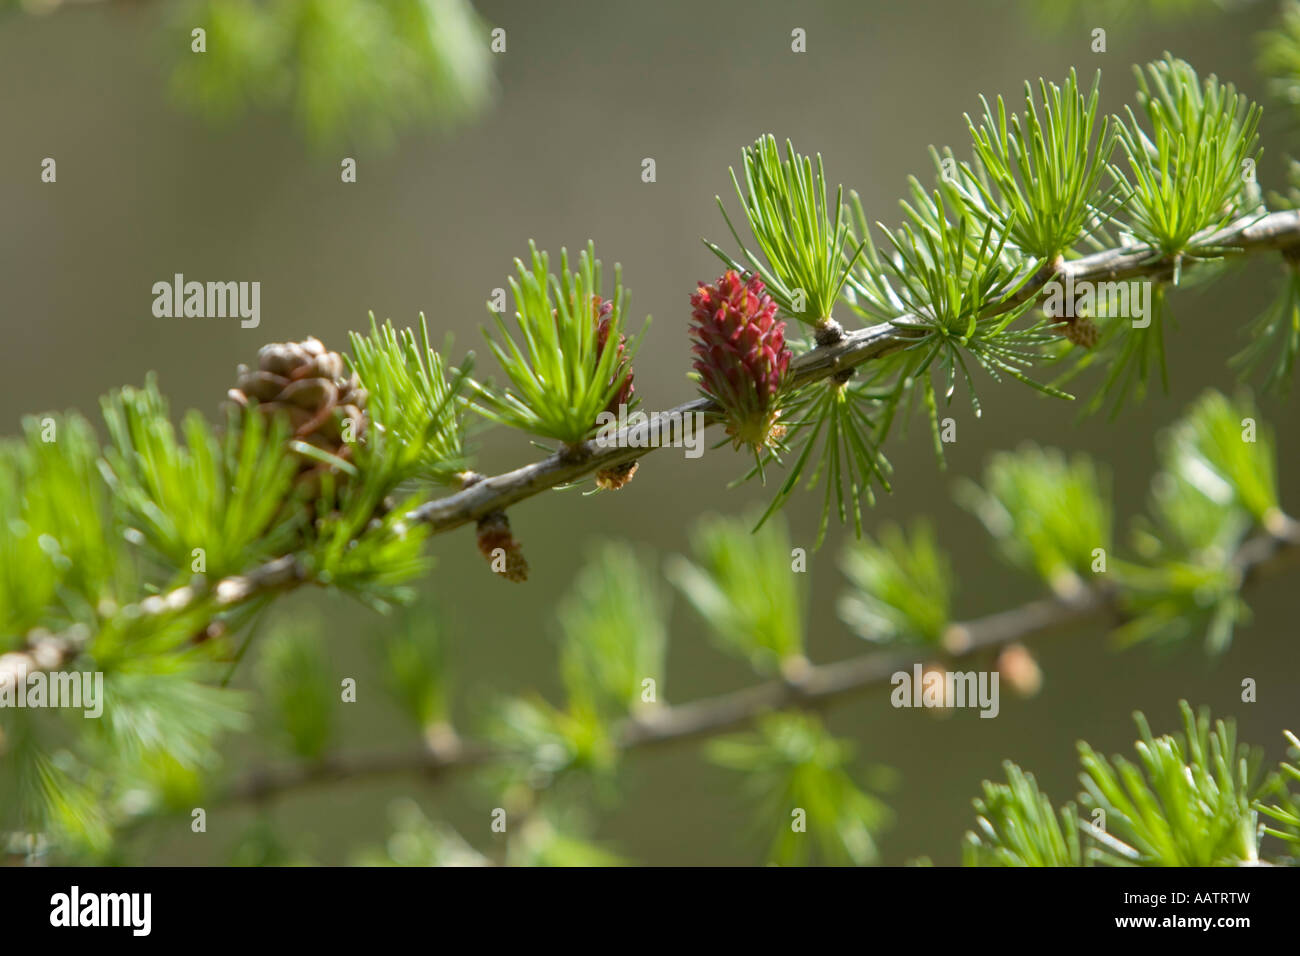 Fruit or flower of the larch tree, Larix Stock Photo